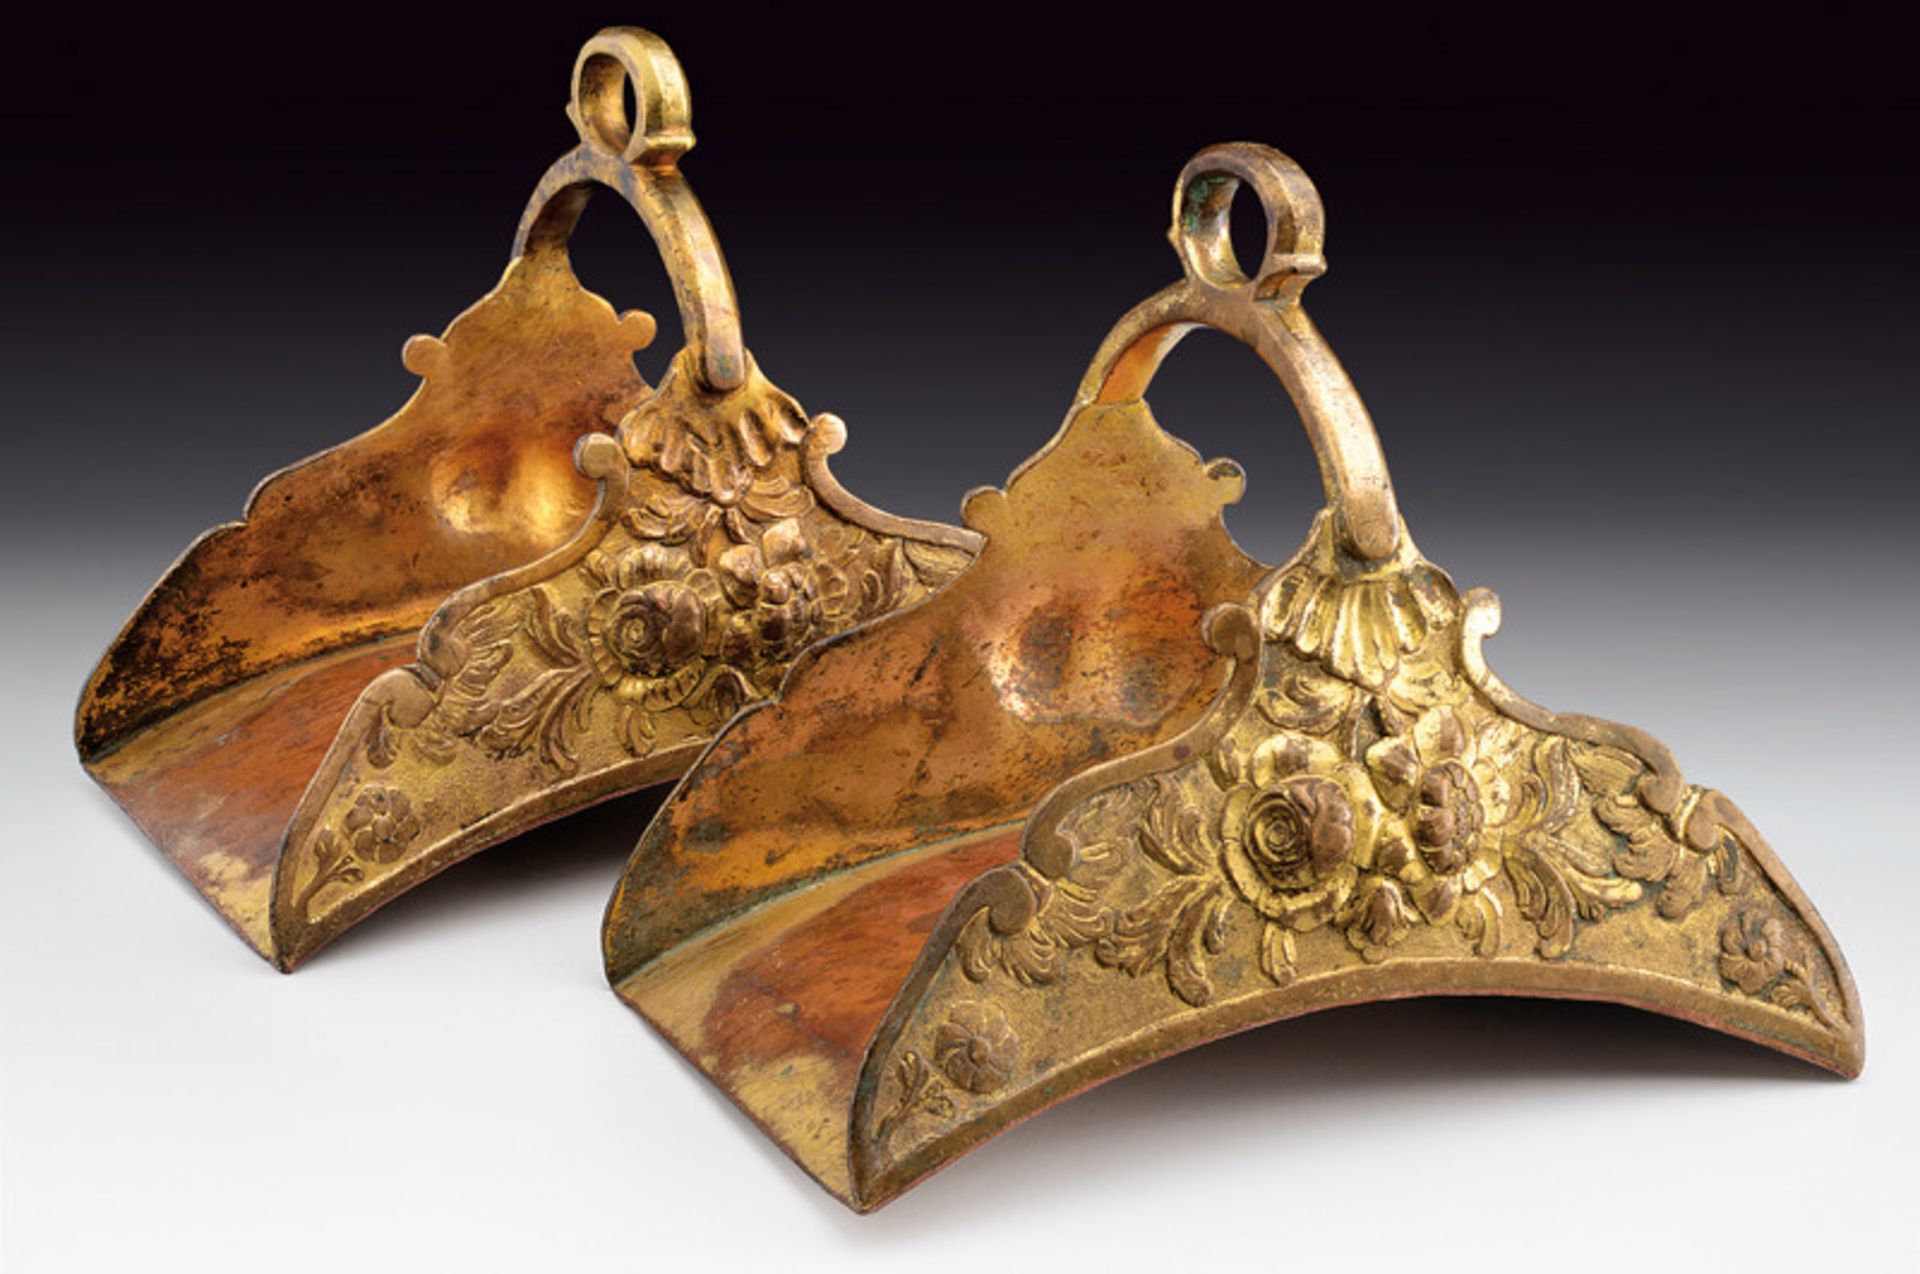 A fine and rare pair of Mameluke stirrups dating: late 17th Century provenance: Ottoman Empire Of